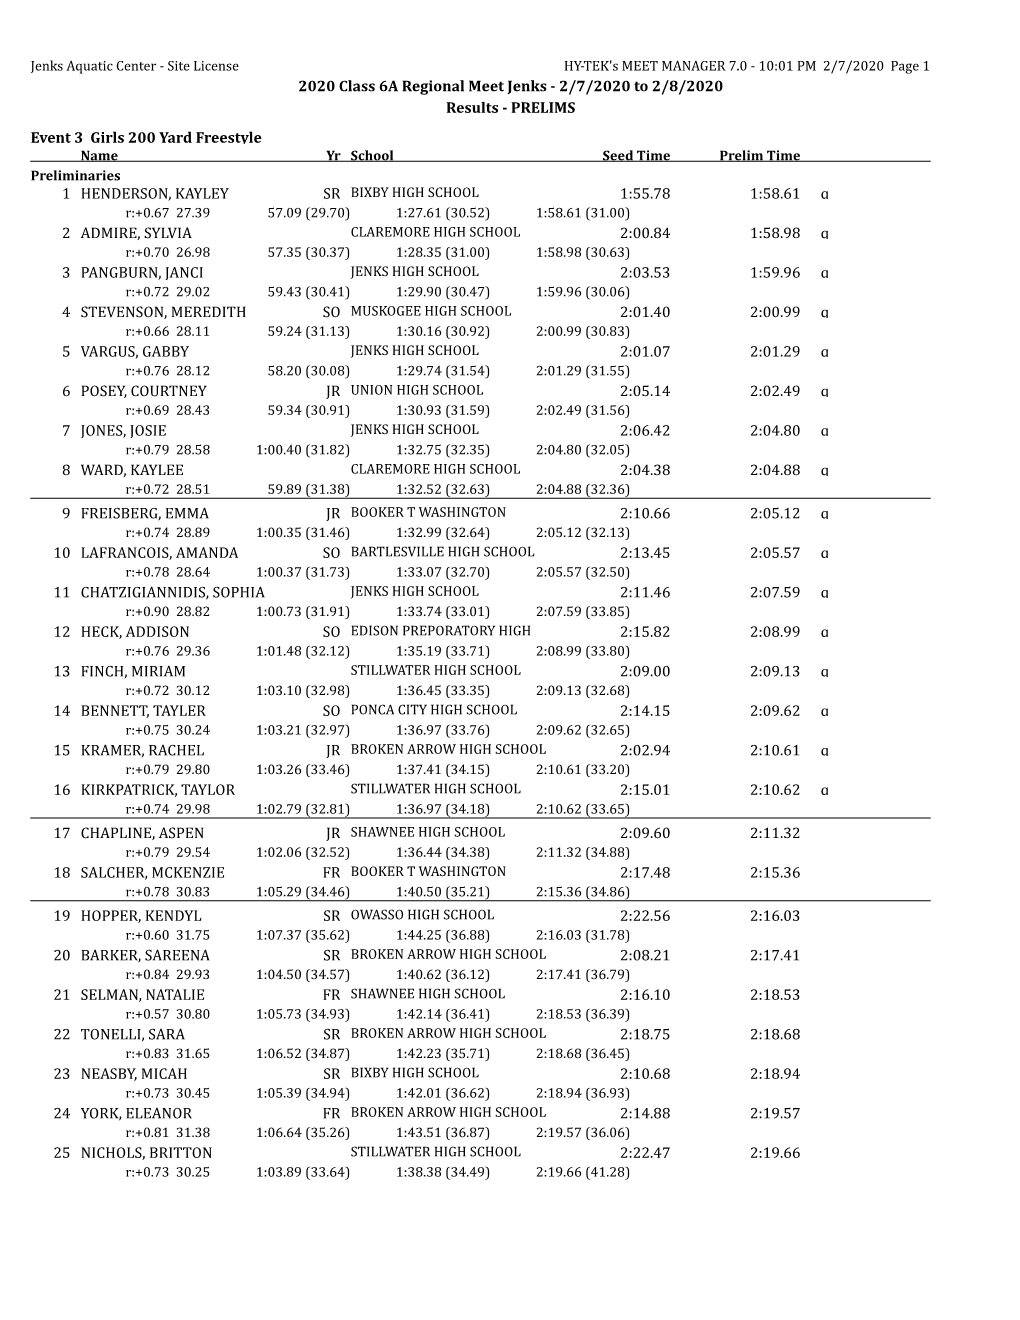 2020 Class 6A Regional Meet Jenks - 2/7/2020 to 2/8/2020 Results - PRELIMS